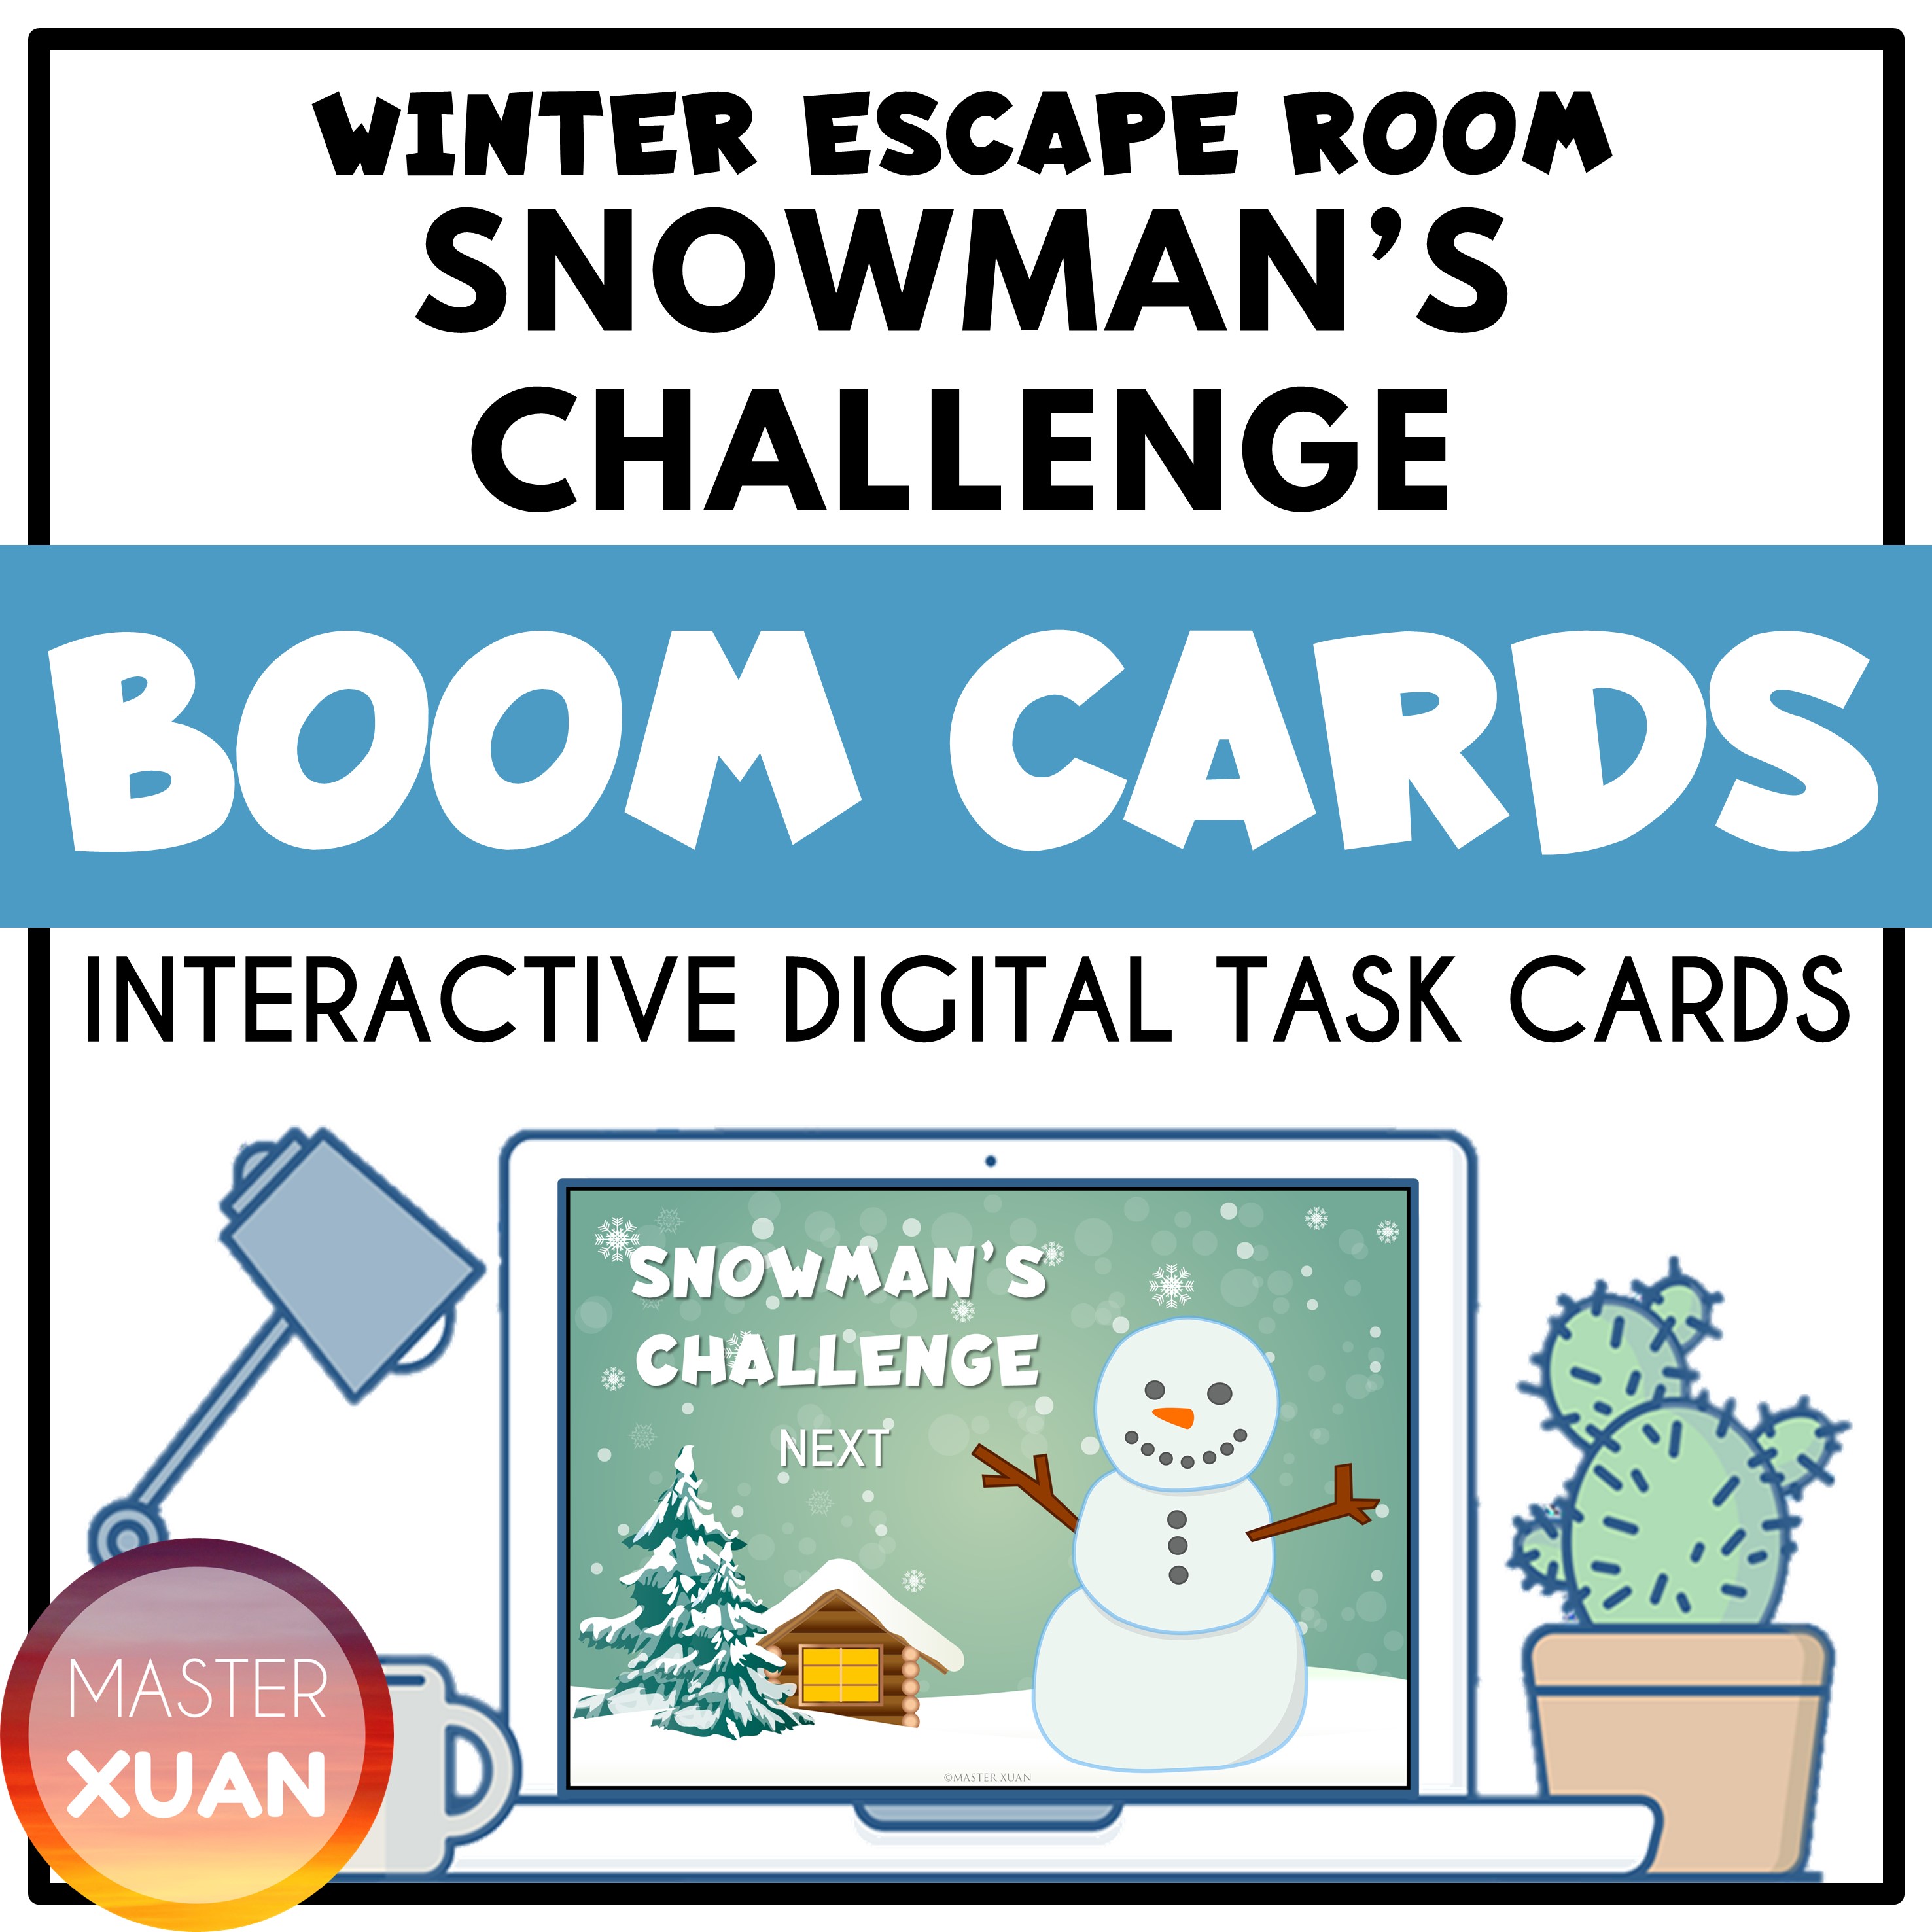 Math game time 4th grade cover shows winter escape room snowman's challenge 